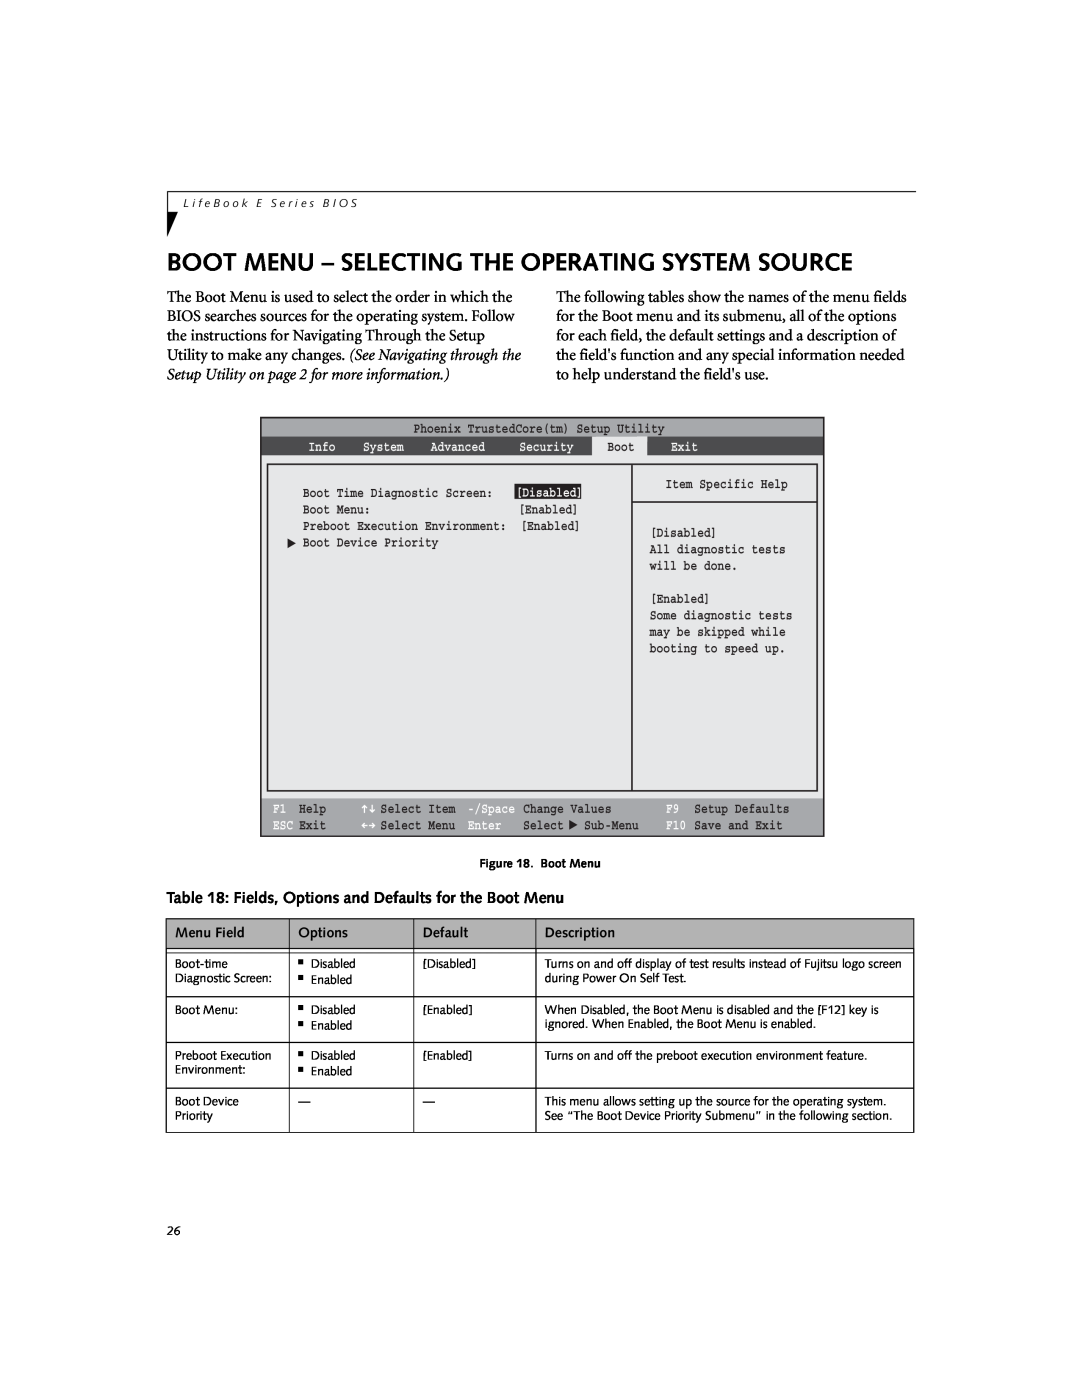 Fujitsu E8410 Boot Menu - Selecting The Operating System Source, Fields, Options and Defaults for the Boot Menu, ESC Exit 